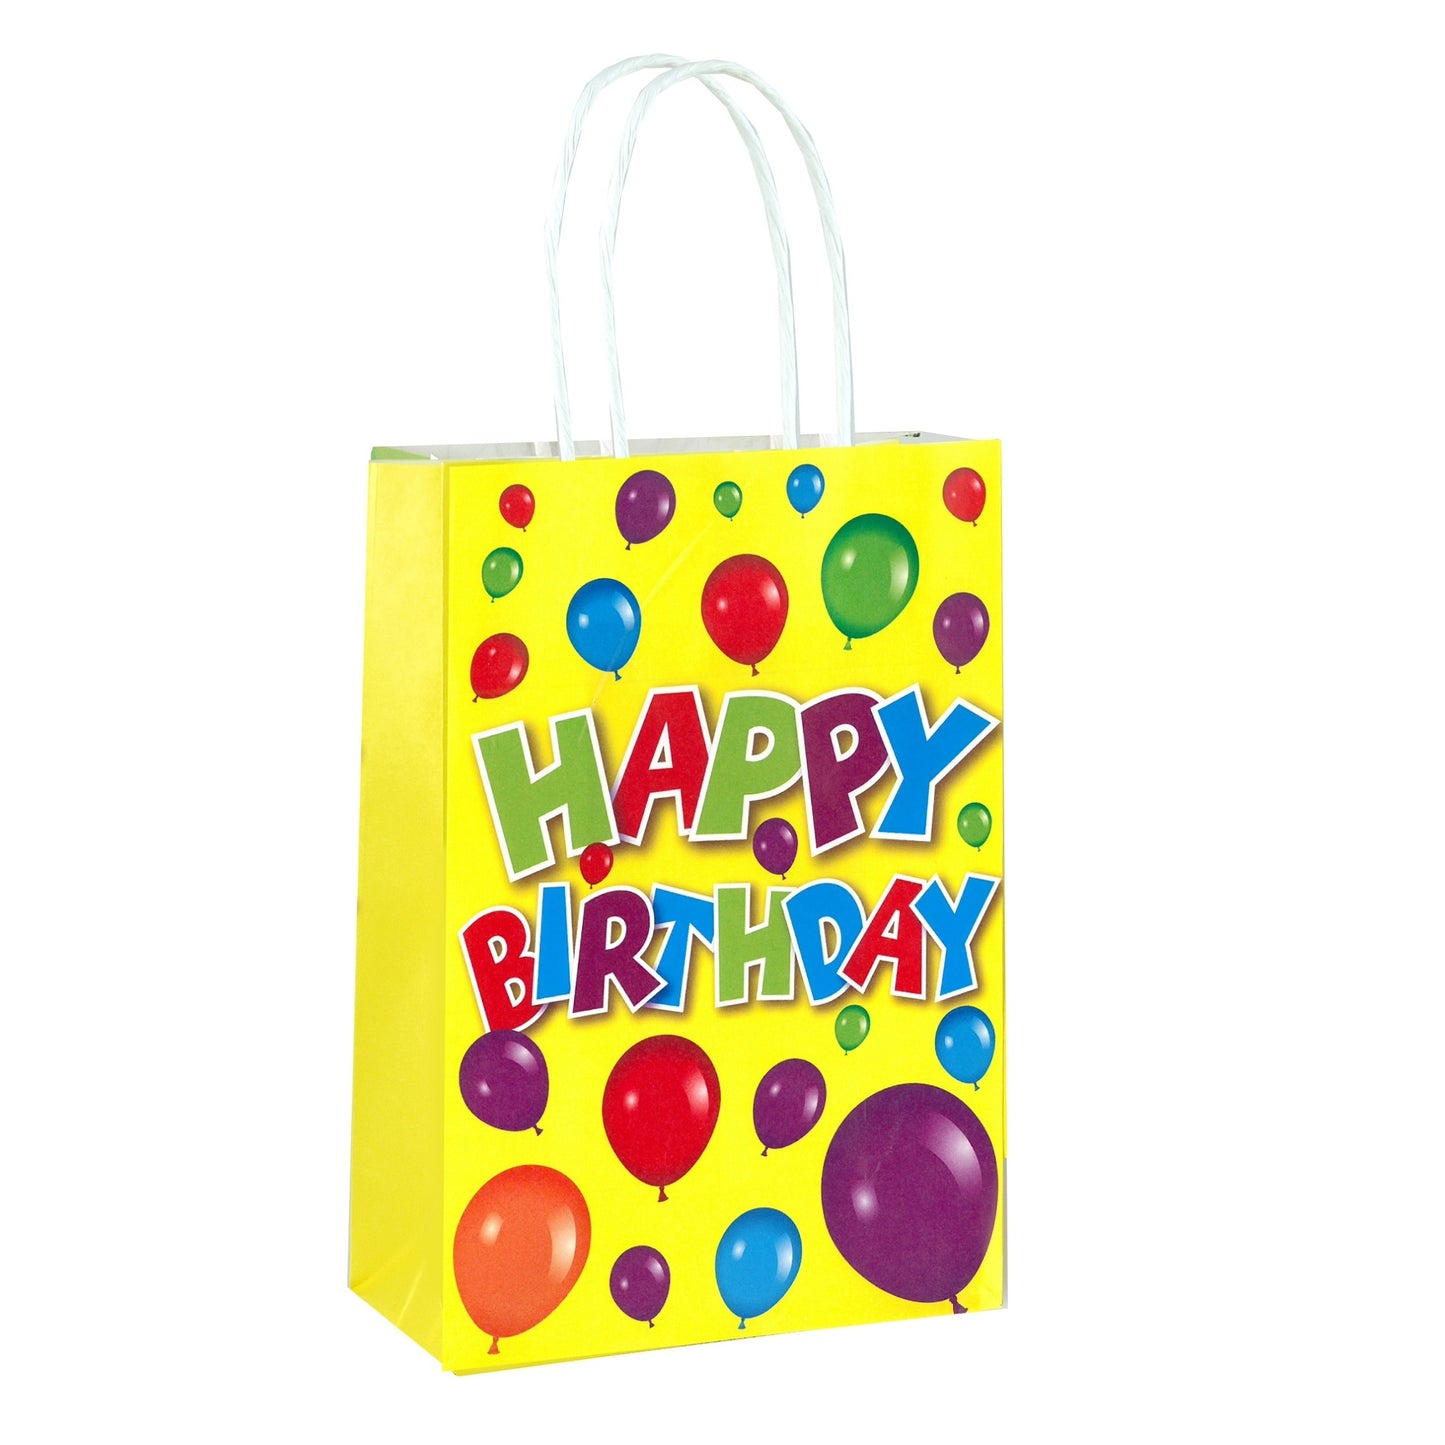 Pack of 24 Happy Birthday Party Bags with Handles